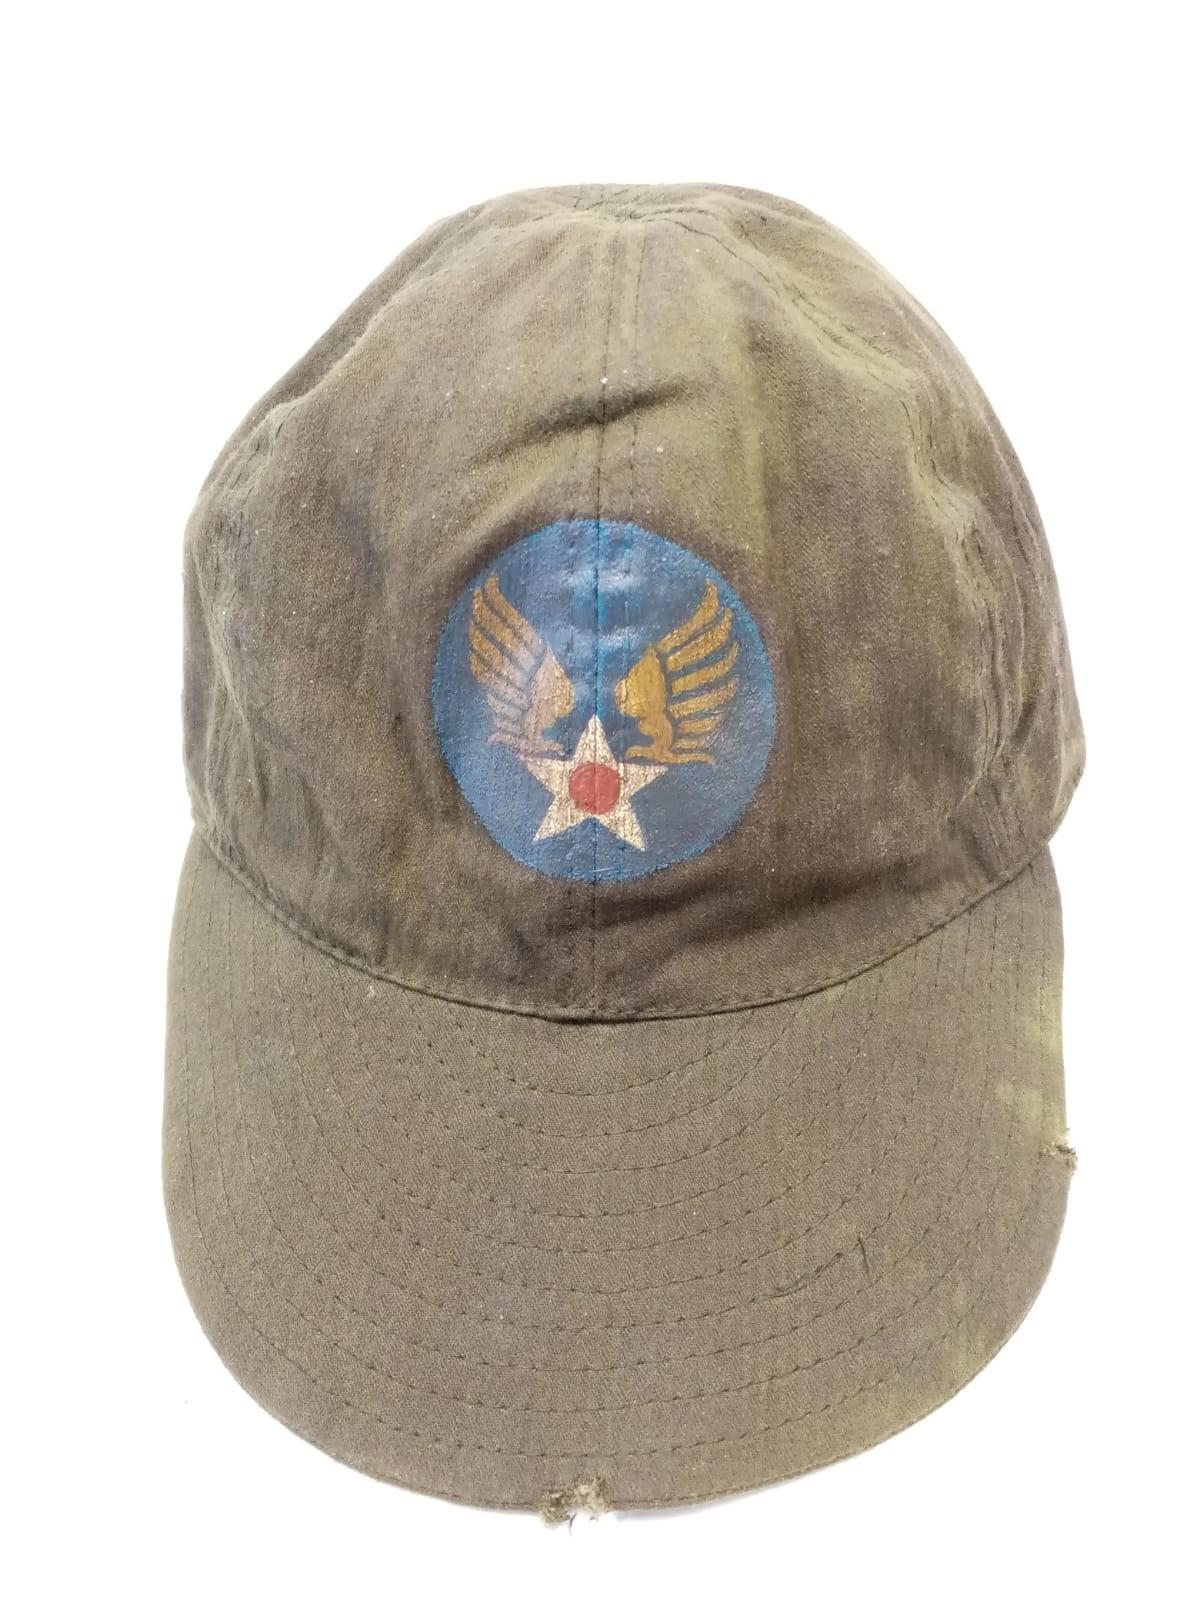 WW2 US Army Air Force mechanics cap with hand painted art